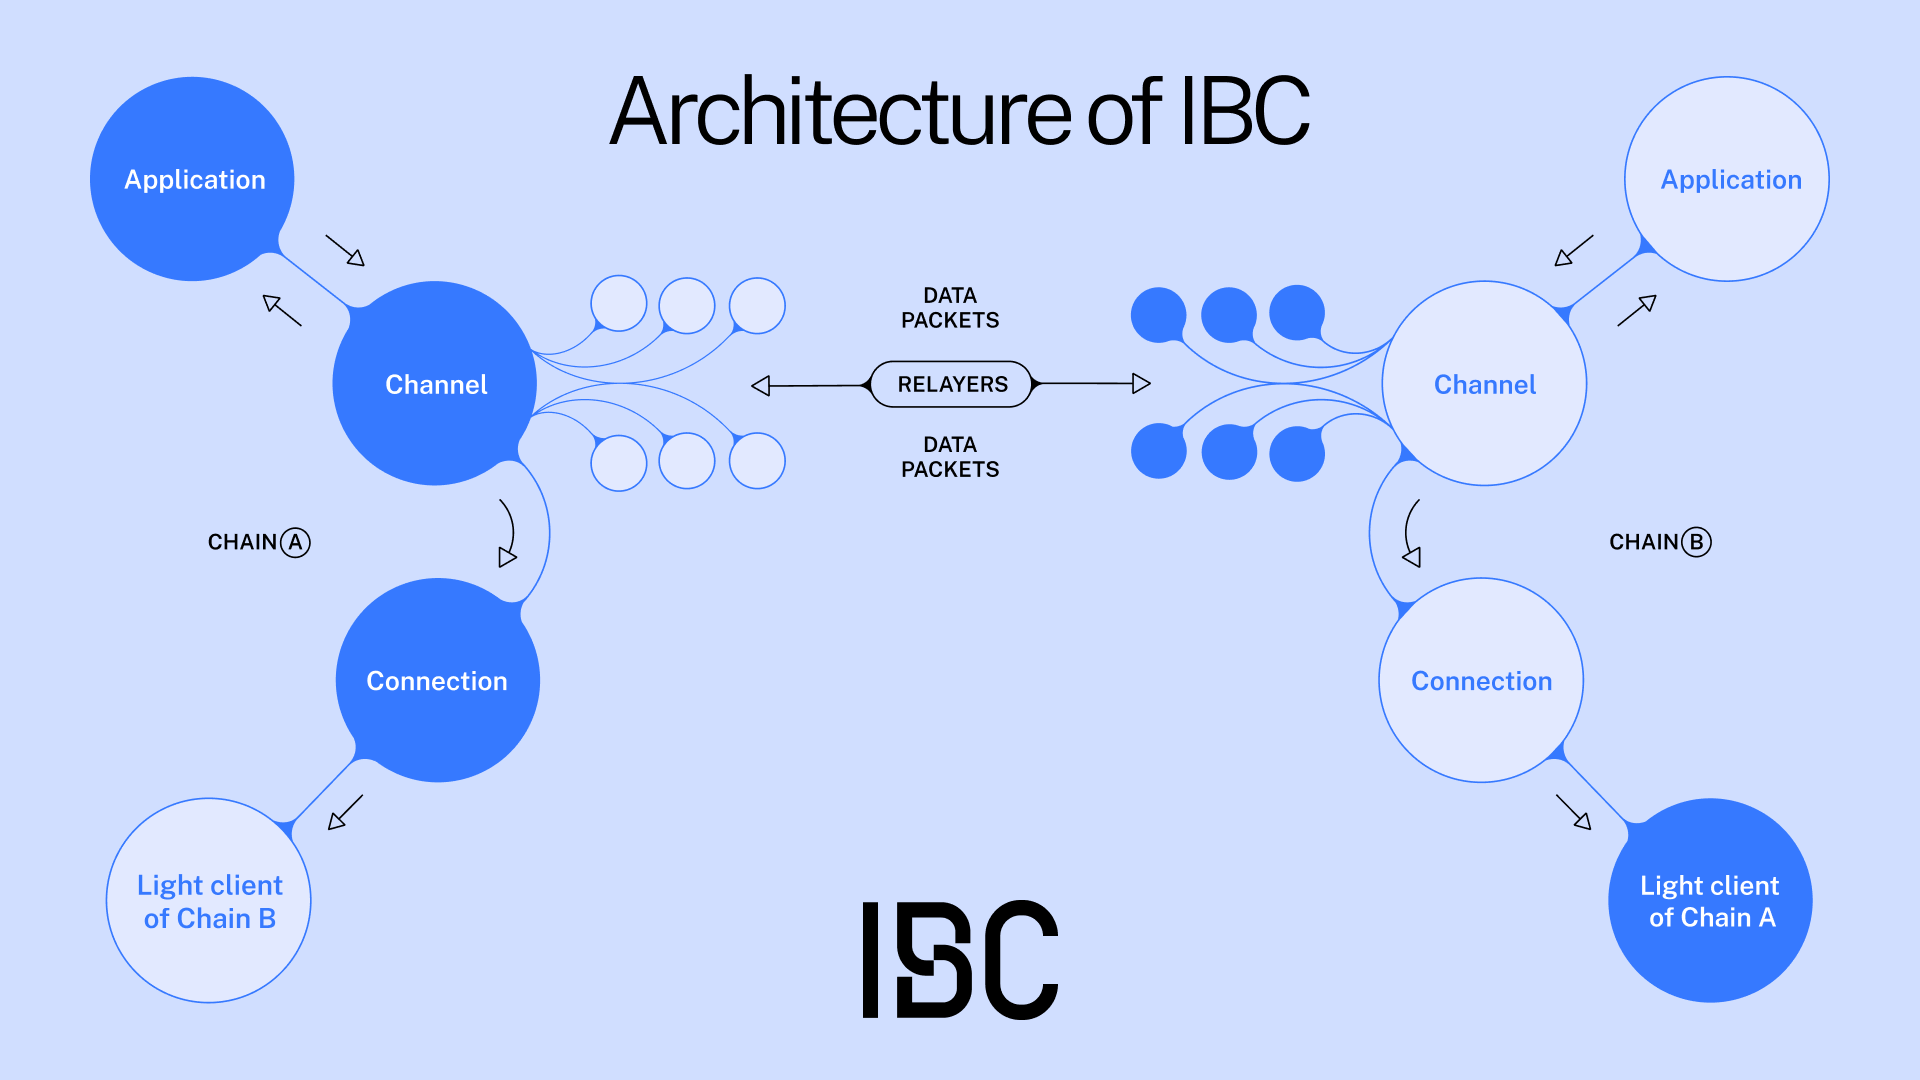 The architecture of IBC.